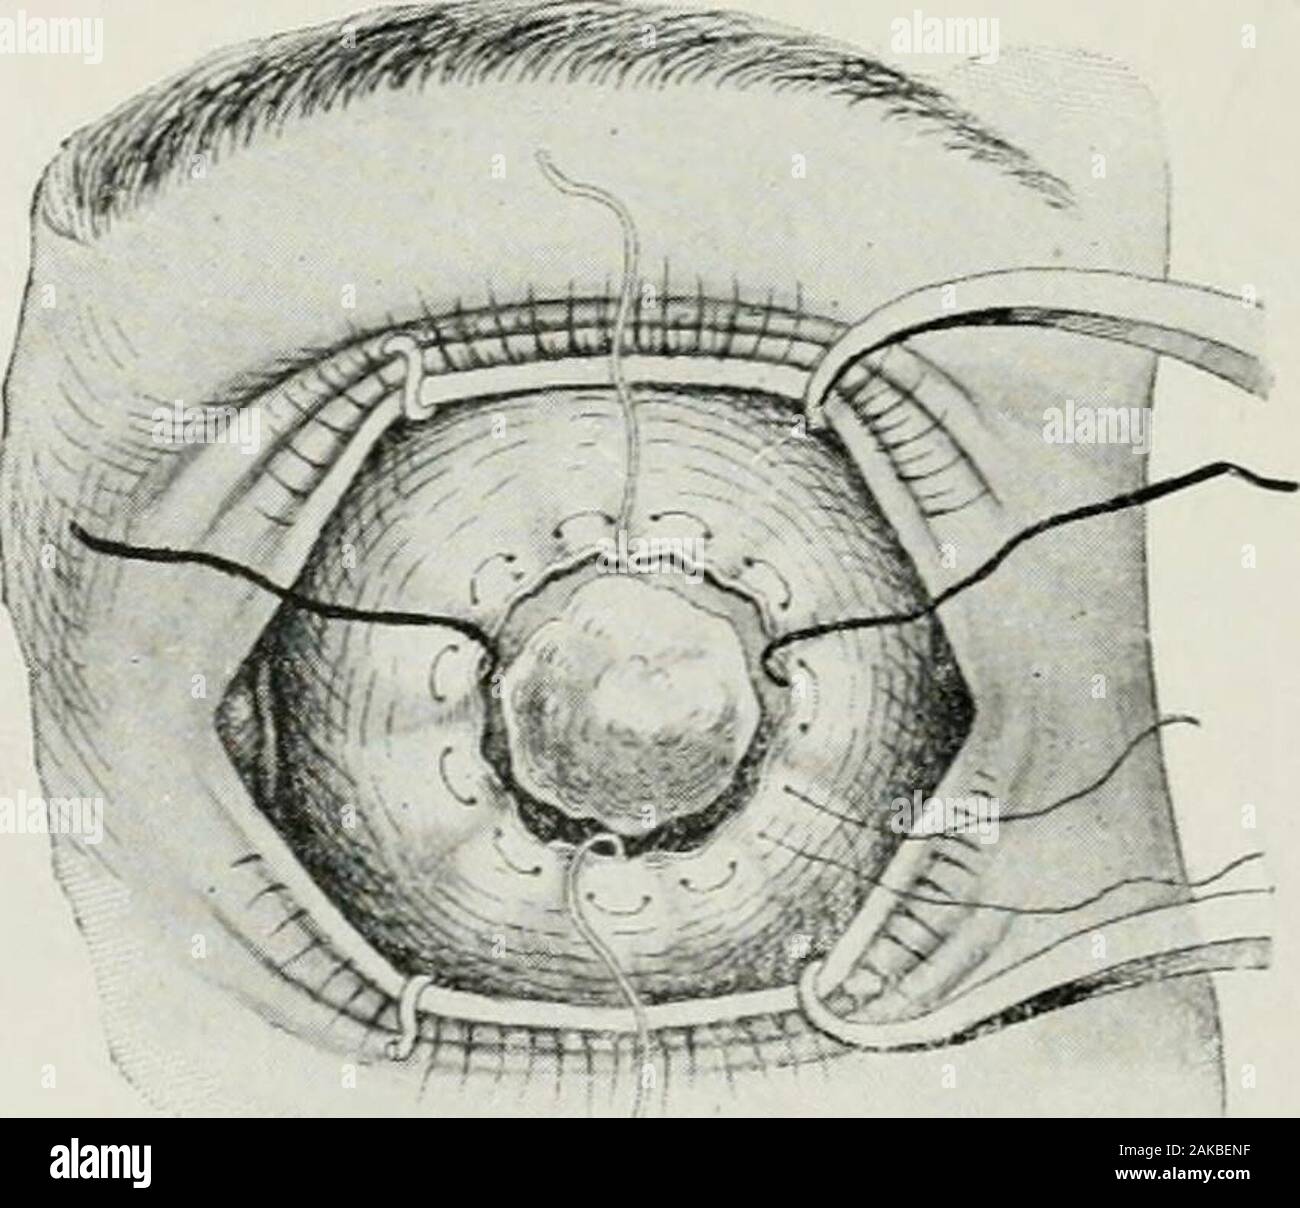 the american encyclopedia and dictionary of ophthalmology edited by casey awood assisted by a large staff of collaborators abscission method of lagrange diagram showing the muscles all sutured andthe purse string suture applied abscission method of lagrange showing the purse string sutures holding themuscles protruding from the opening abscission of the eye 39 the cut edges sutured and the remaining globar tissues form a padfor an artificial eye the operation was first proposed by saint ivesin the 18th century but since that time many operators have favoredvarious forms of abscissi 2AKBENF